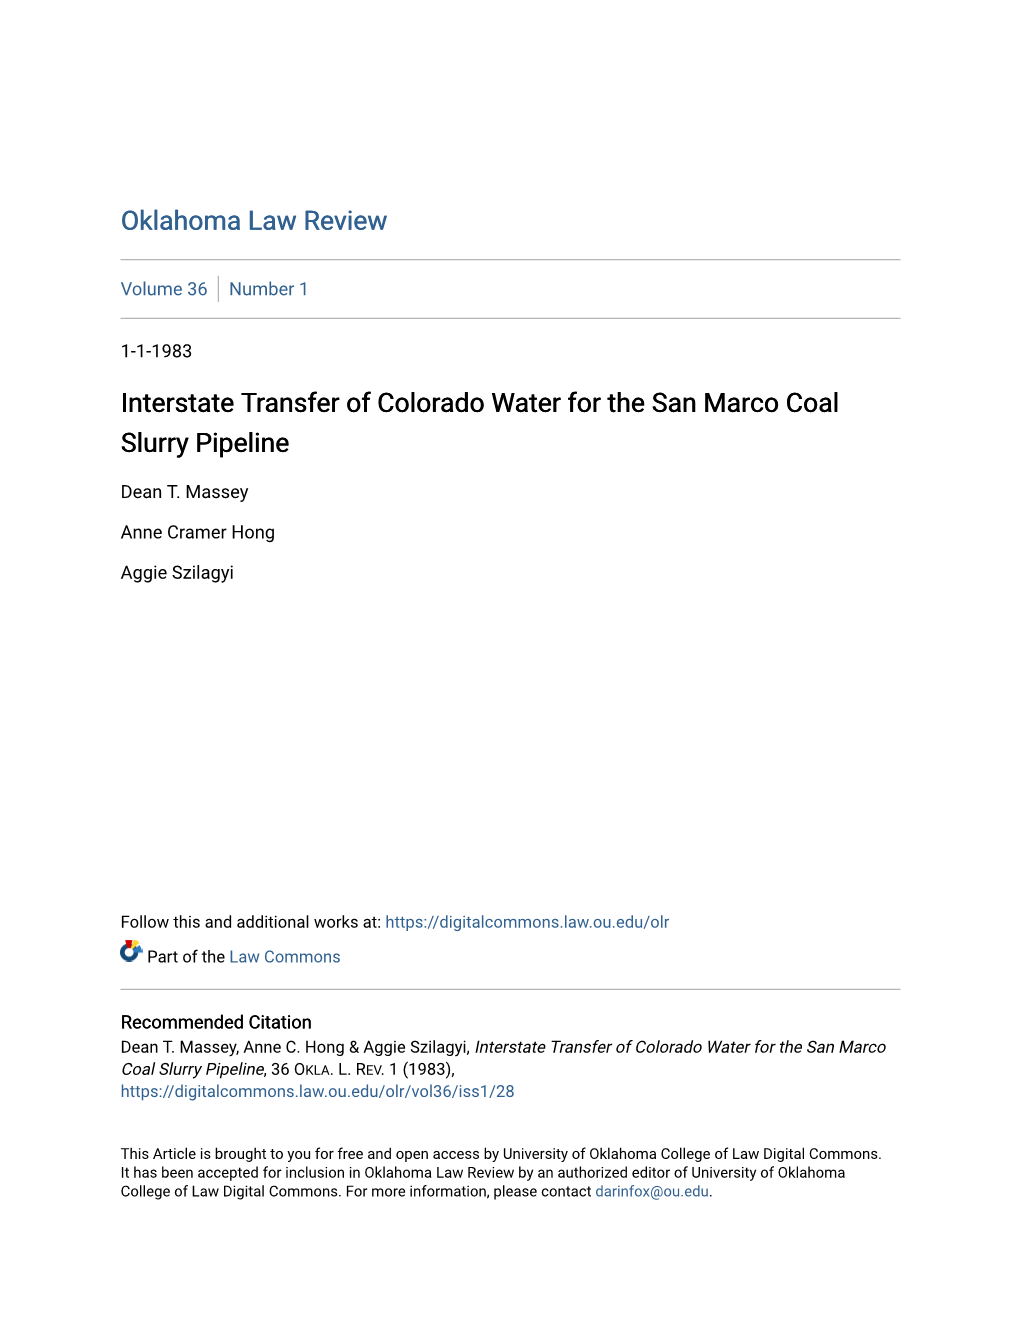 Interstate Transfer of Colorado Water for the San Marco Coal Slurry Pipeline